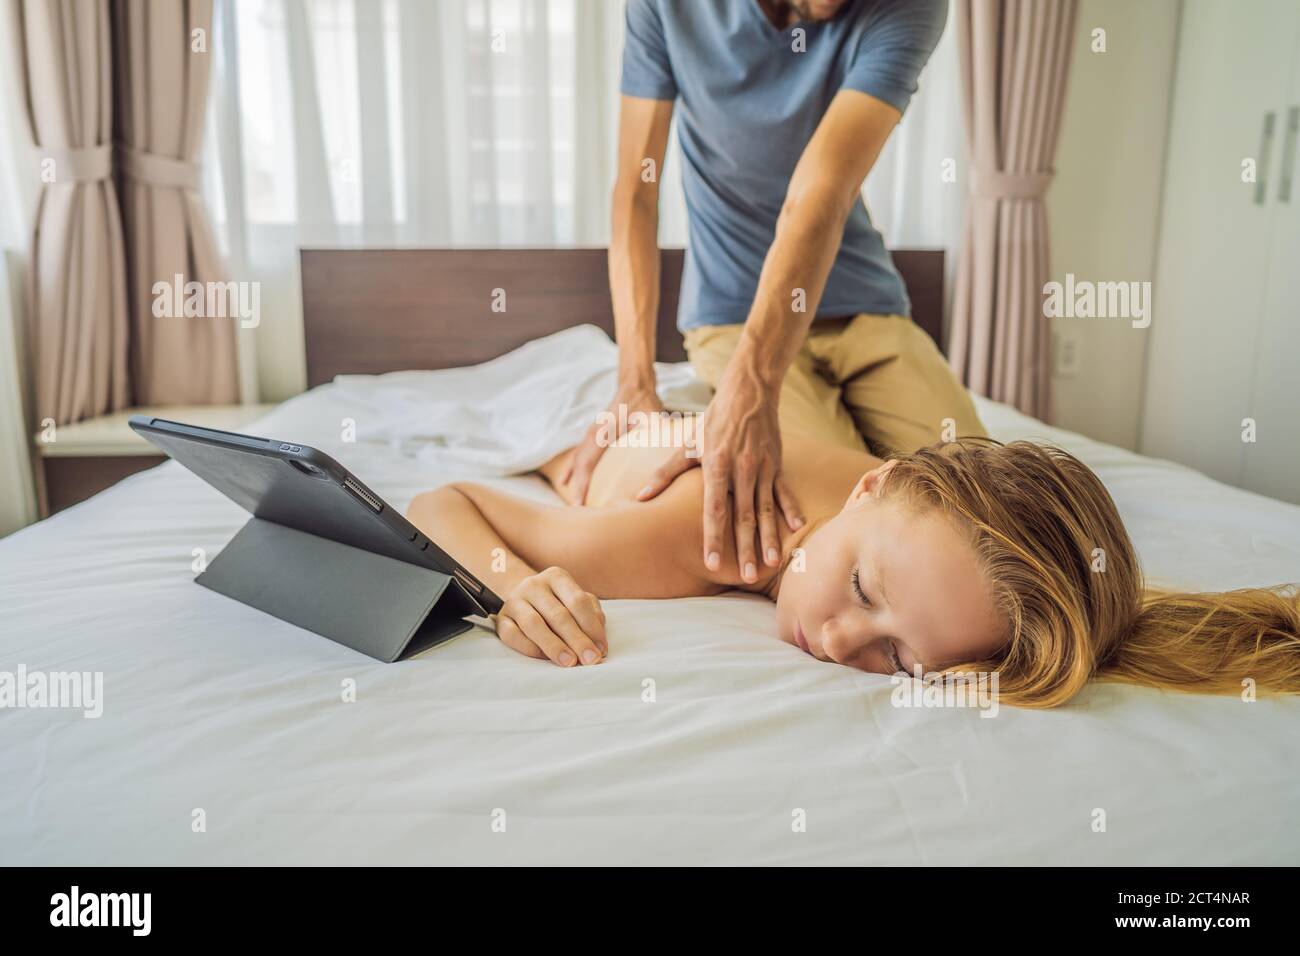 Massage by training online video. Online massage training. Health Wellness Massage Online Training Concept Stock Photo